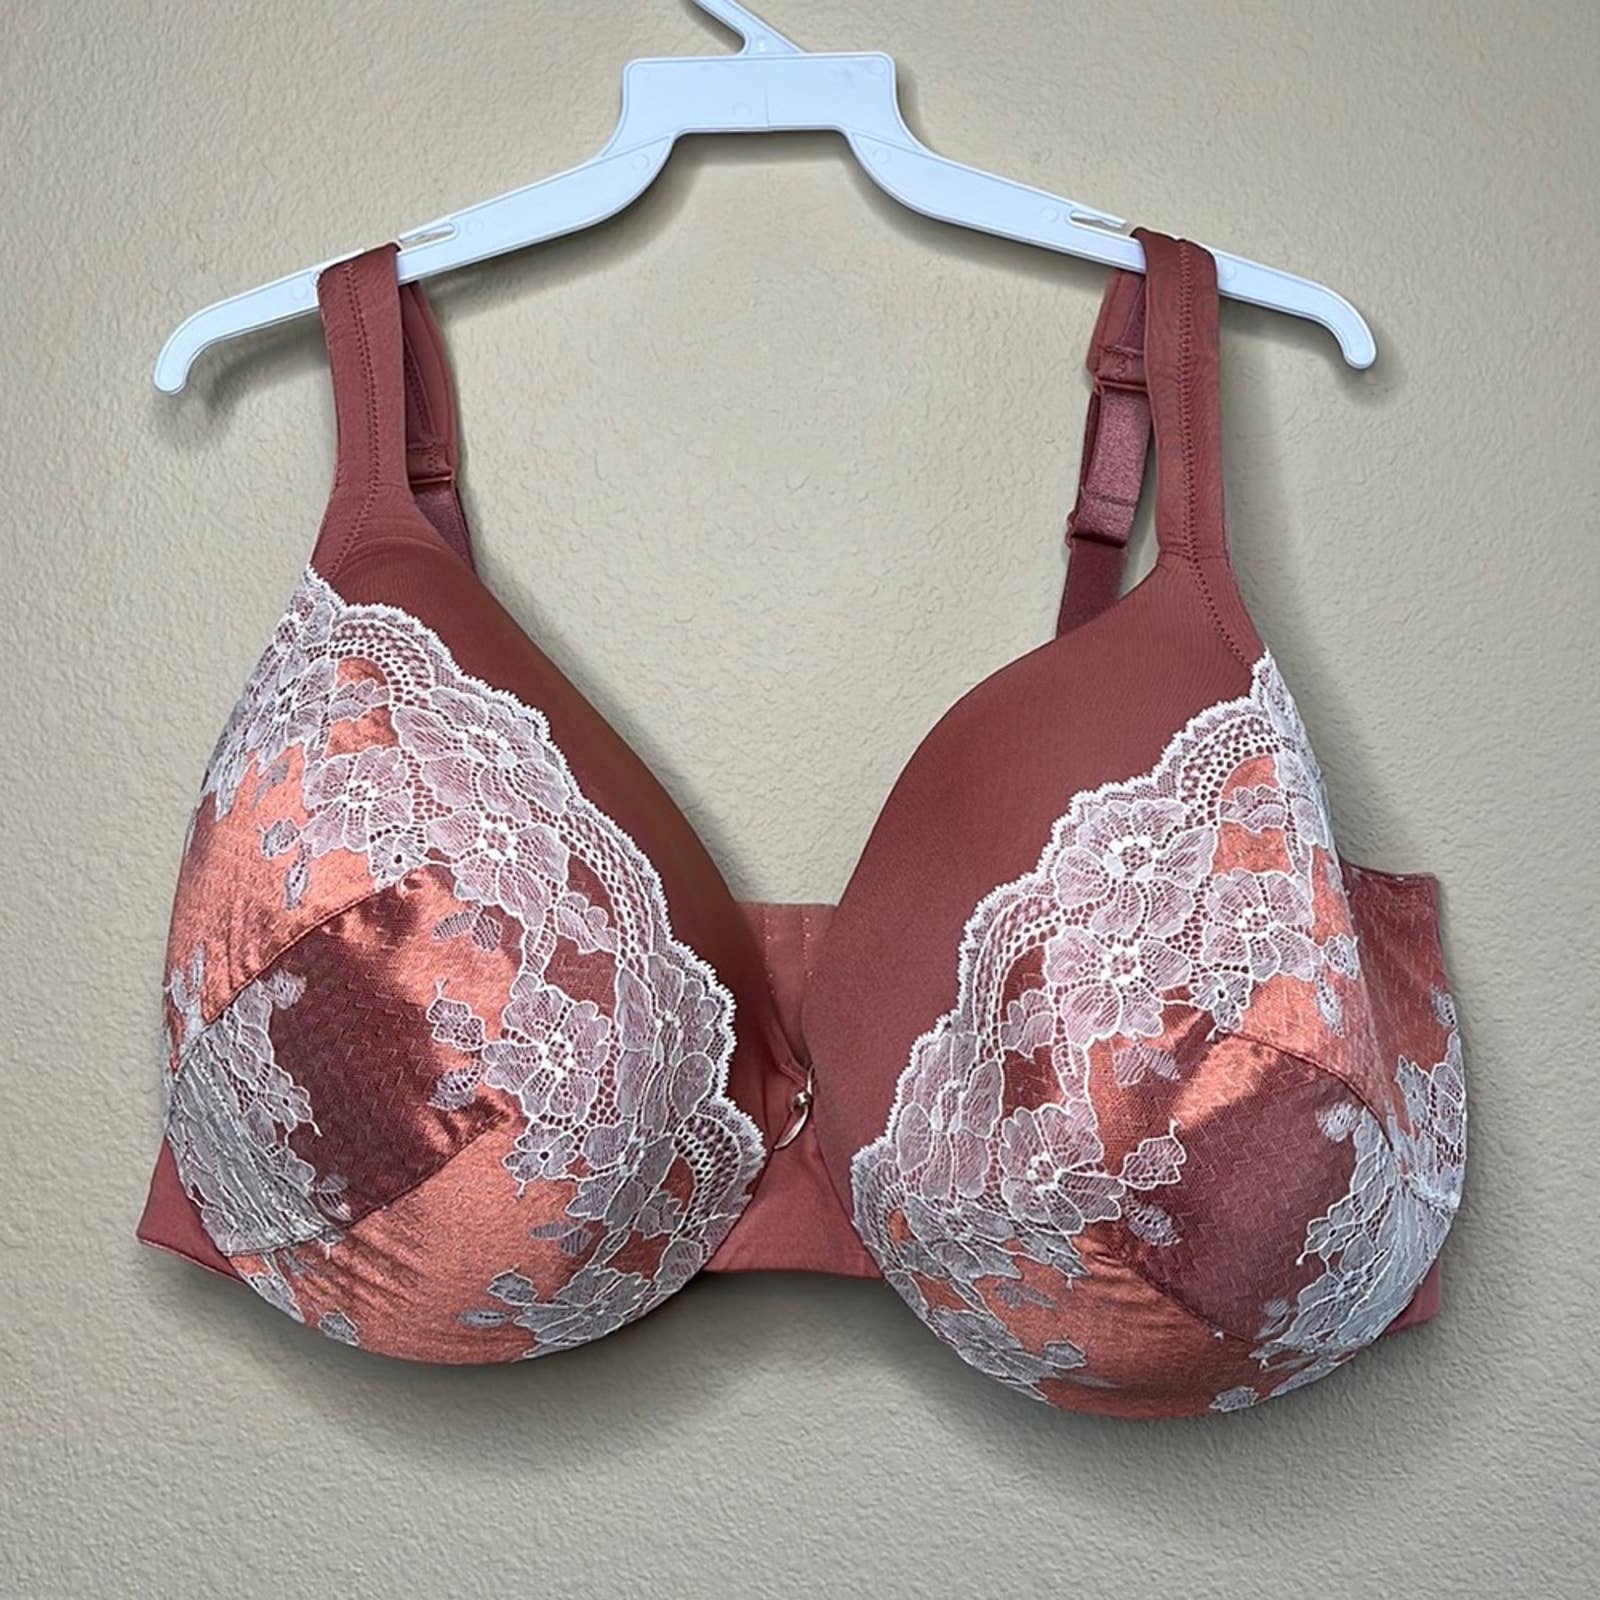 42G Cacique Plus Dusty Rose Pink White Lace Lightly Lined Full